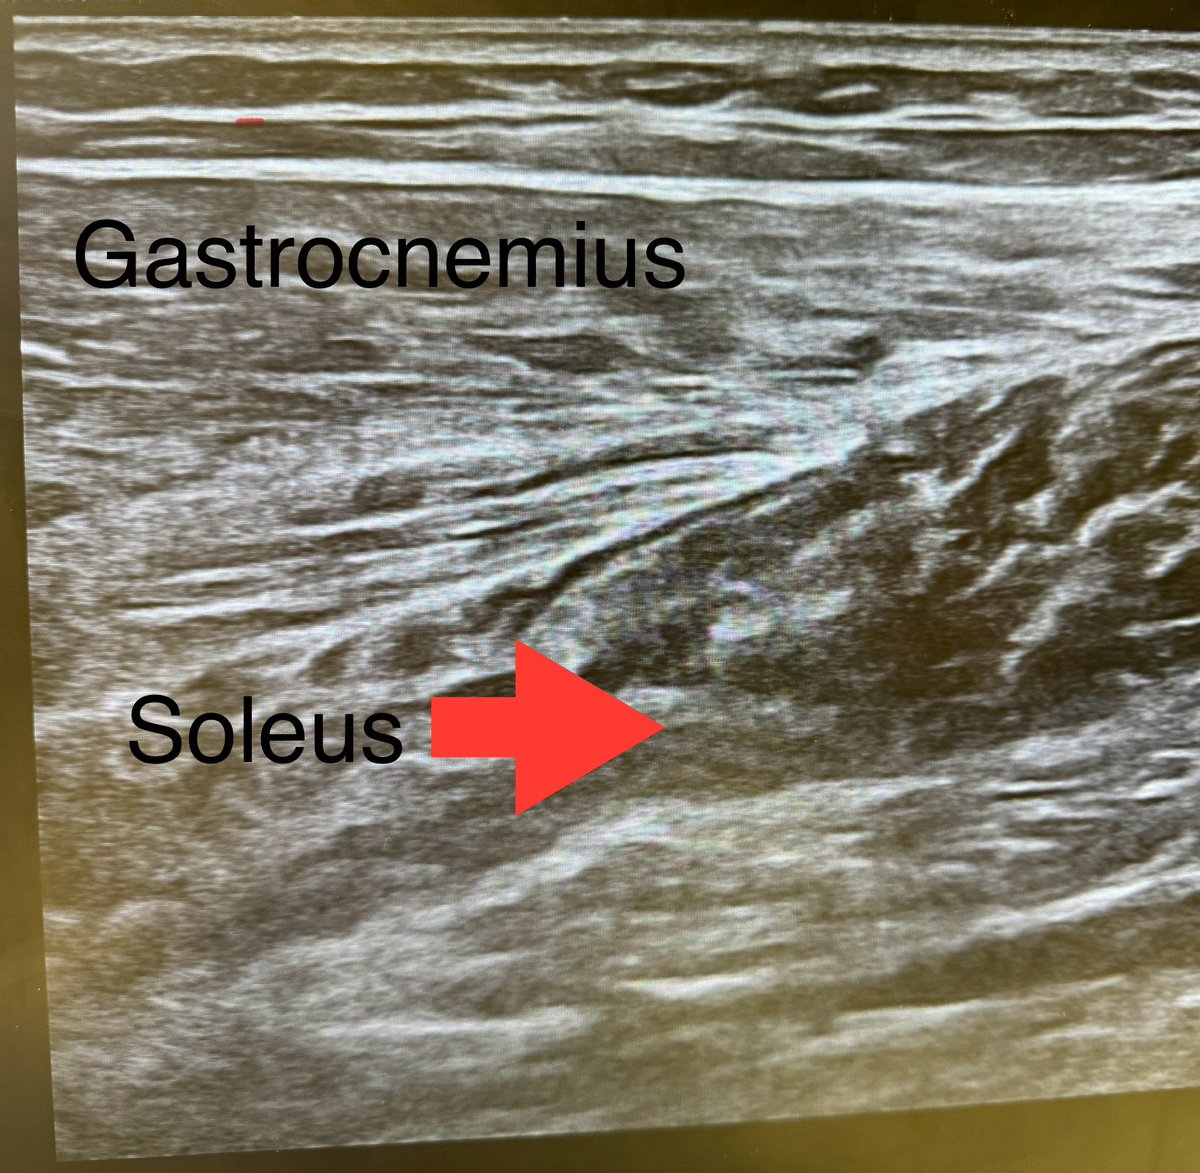 Here’s what a grade 1 (mild) soleus (calf) strain looks like on ultrasound. This is what Bucks Giannis and Celtics Porzingis have been dealing with.